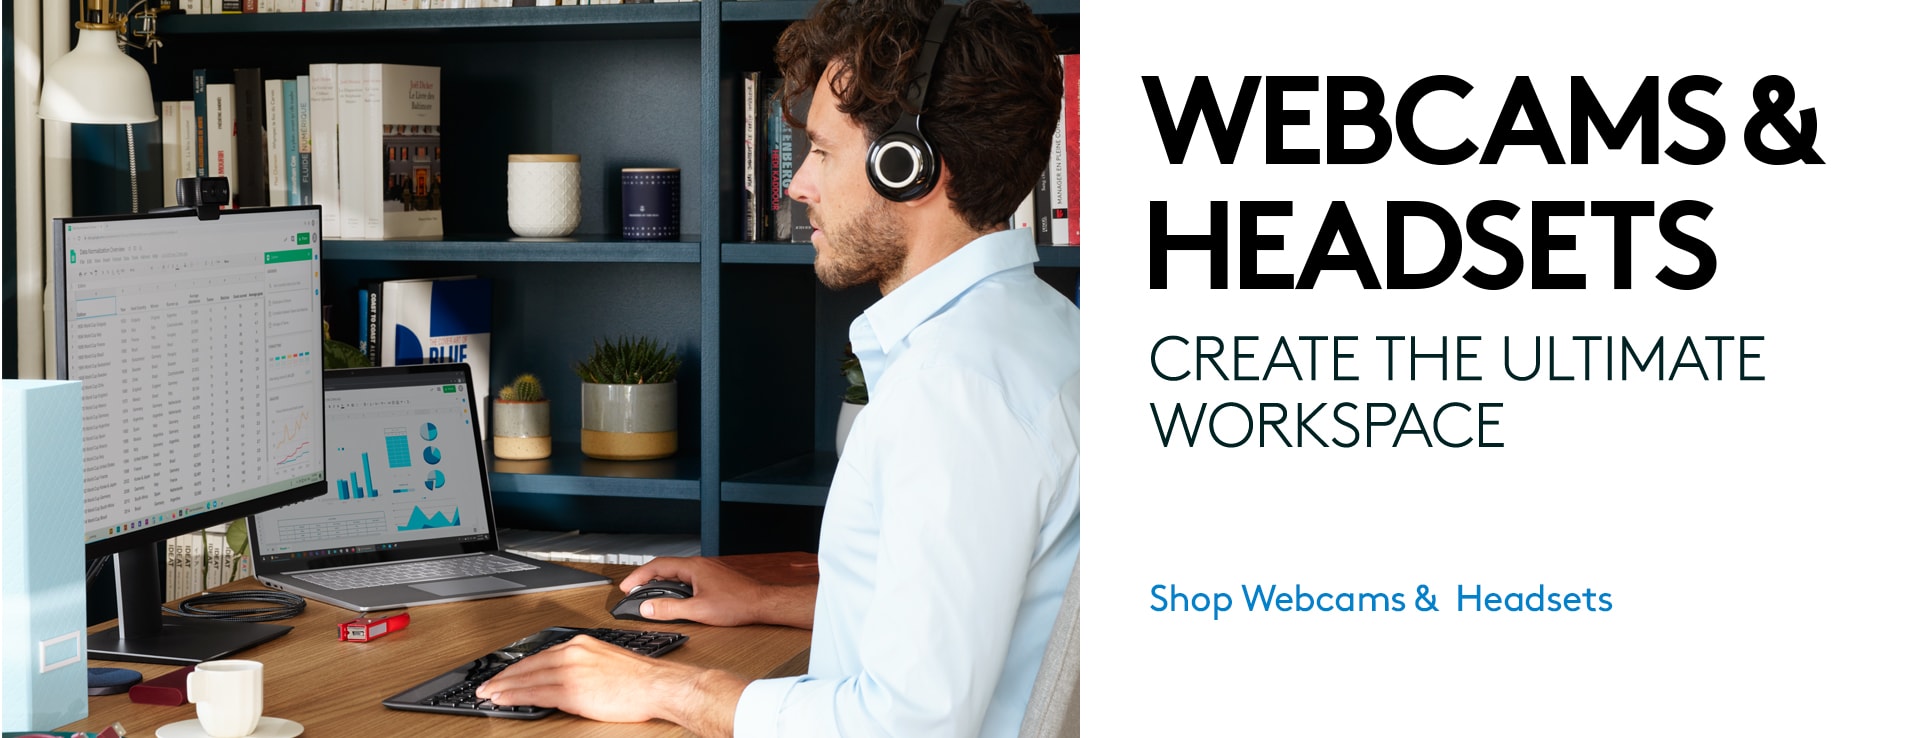 Webcams & Headsets | Create the ultimate workspace